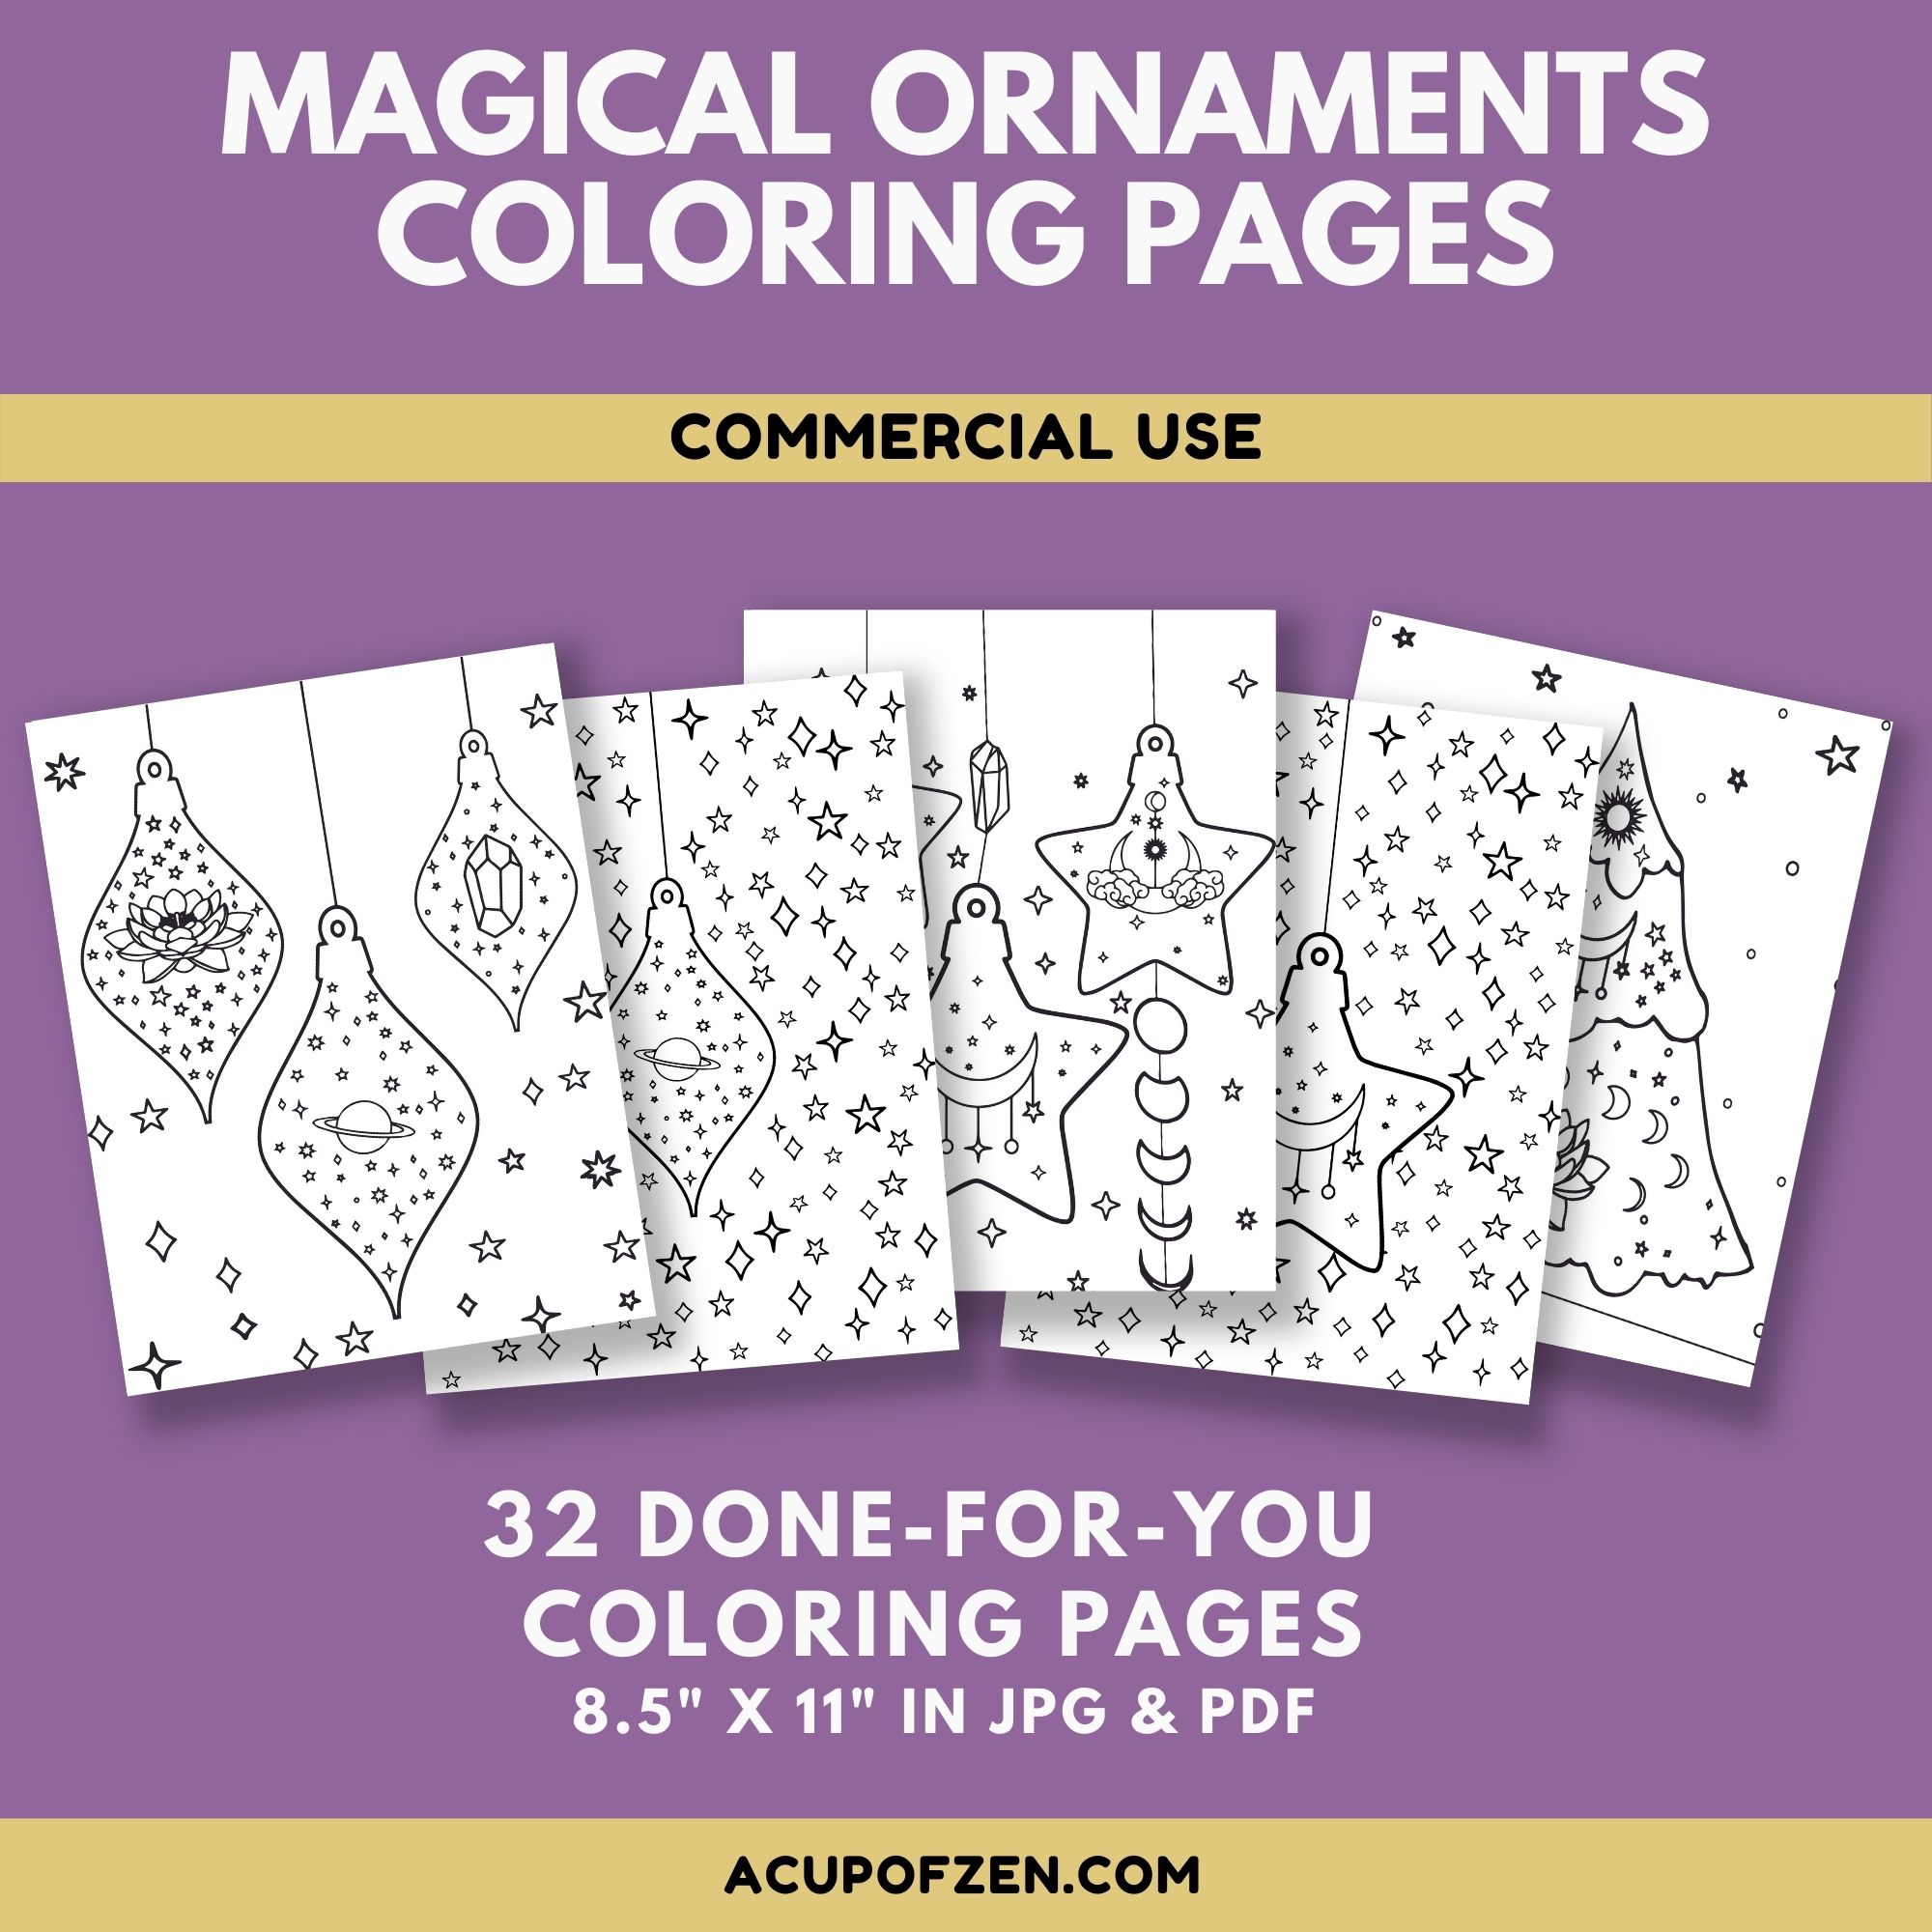 Magical Ornaments Coloring Pages Commercial Use